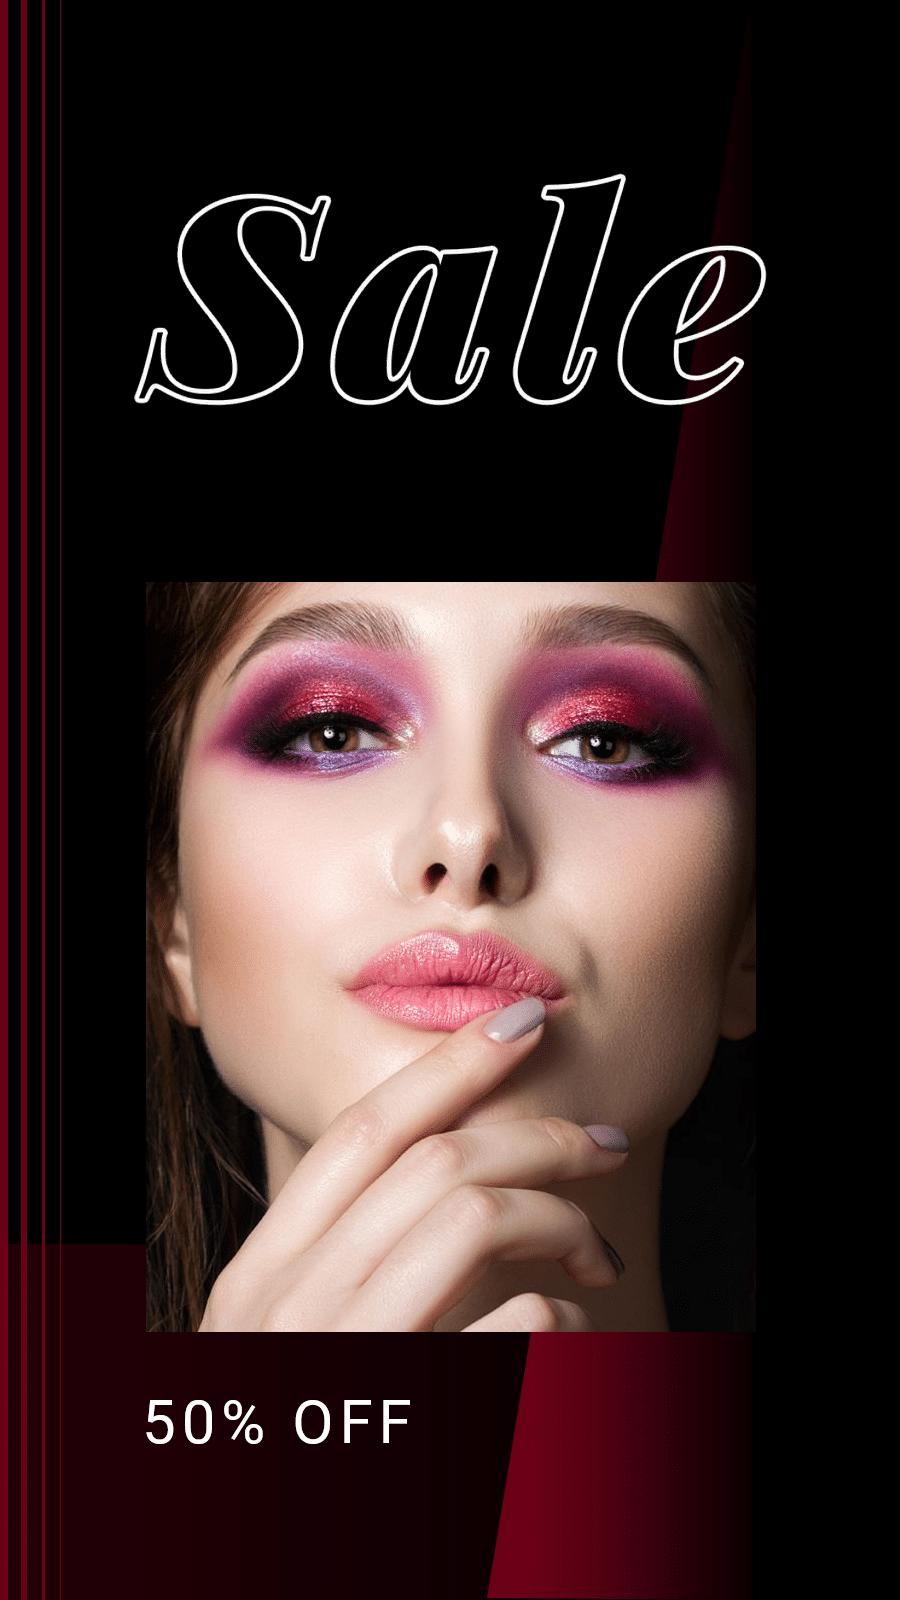 Black Friday Beauty Makeup Products Discount Sale Announcement Ecommerce Story预览效果